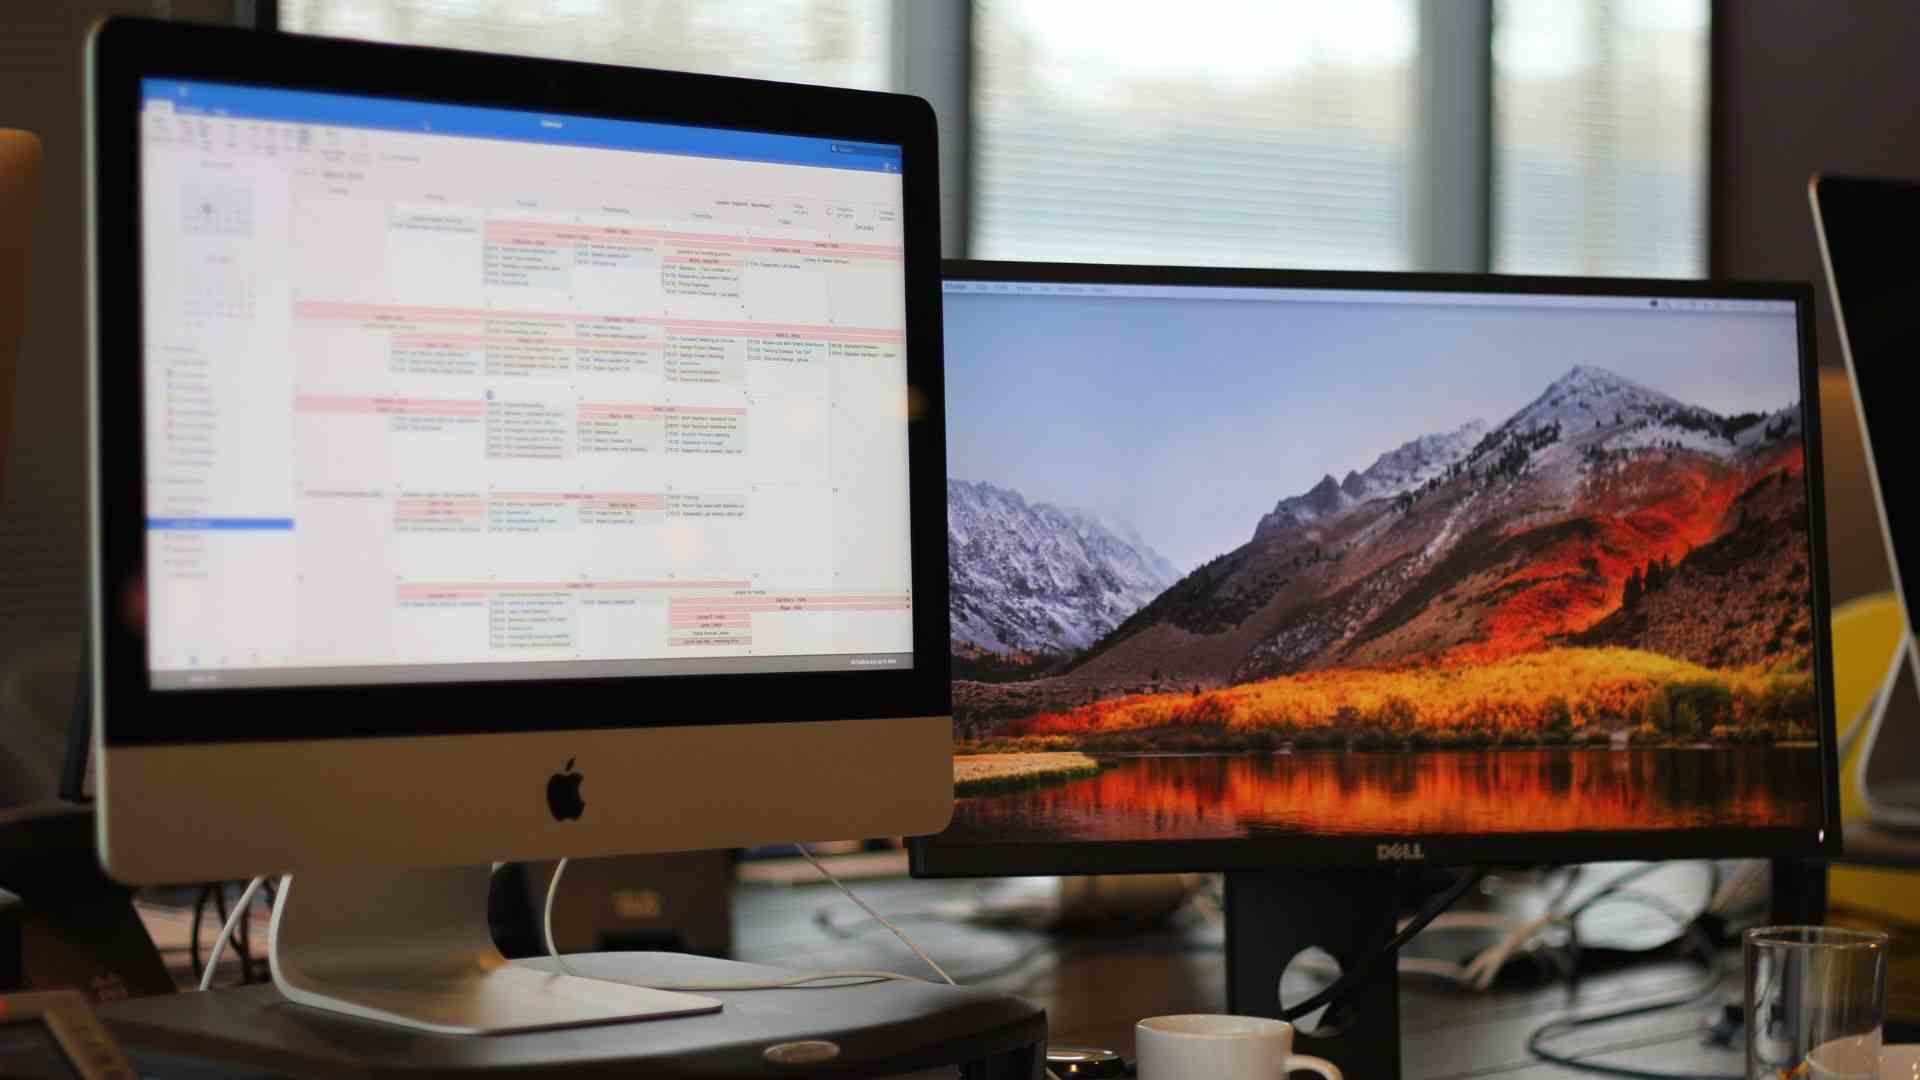 use fix monitors to Fix the Problem of Fitting two Monitors in Small Place: